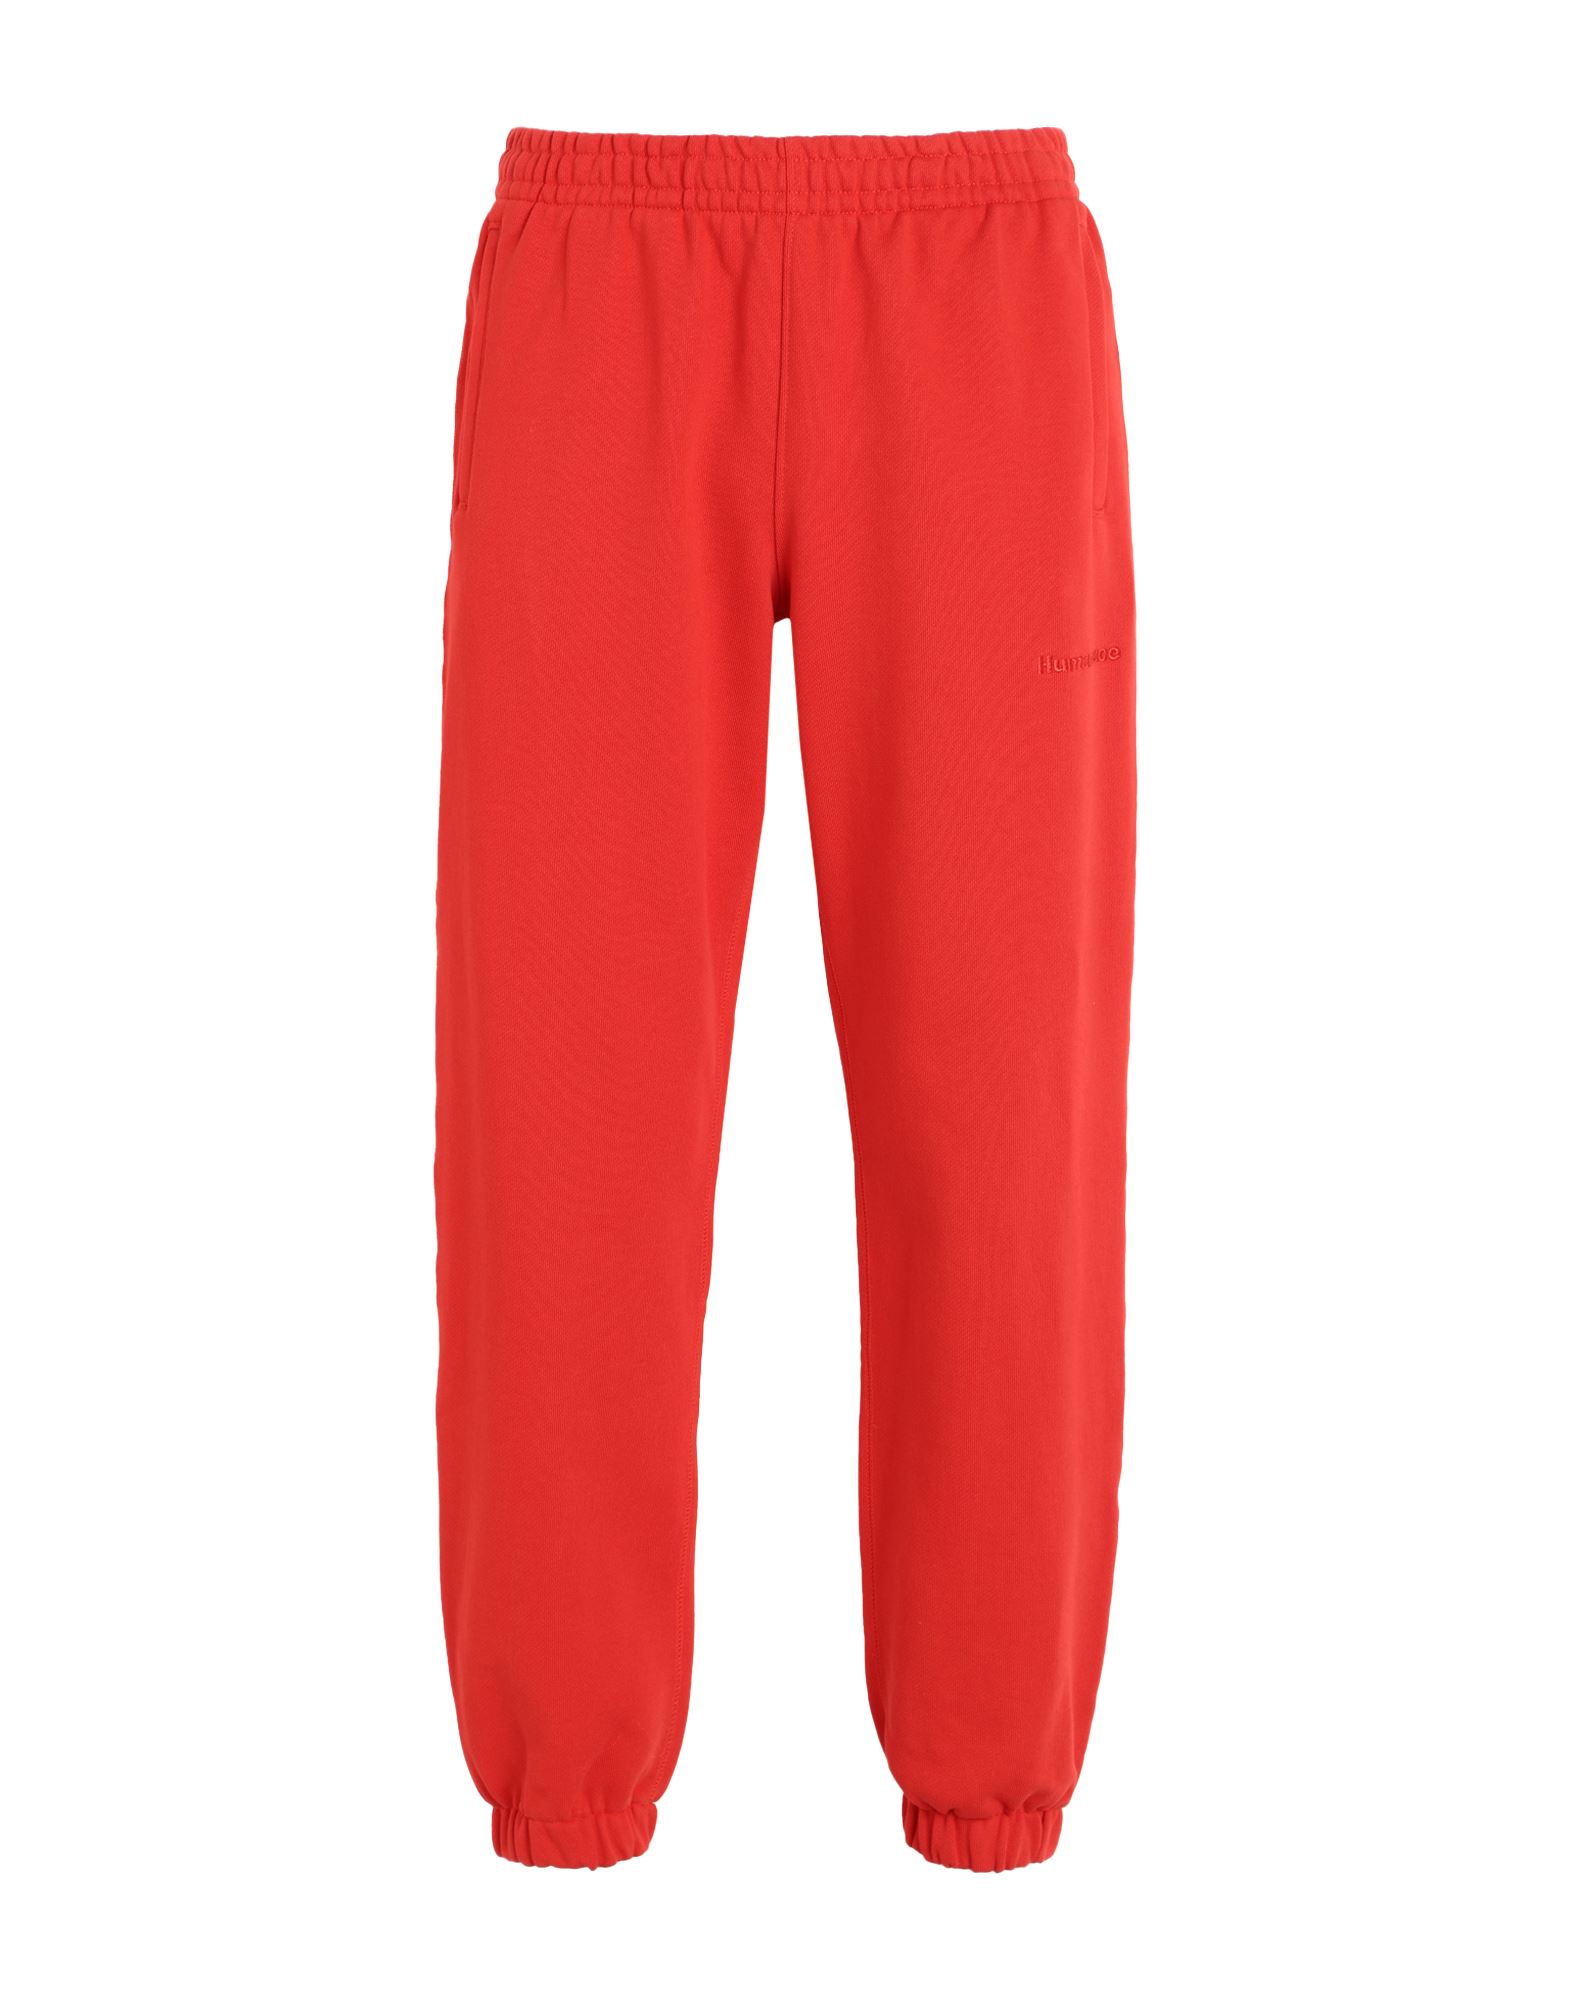 Adidas Originals By Pharrell Williams Pants In Red